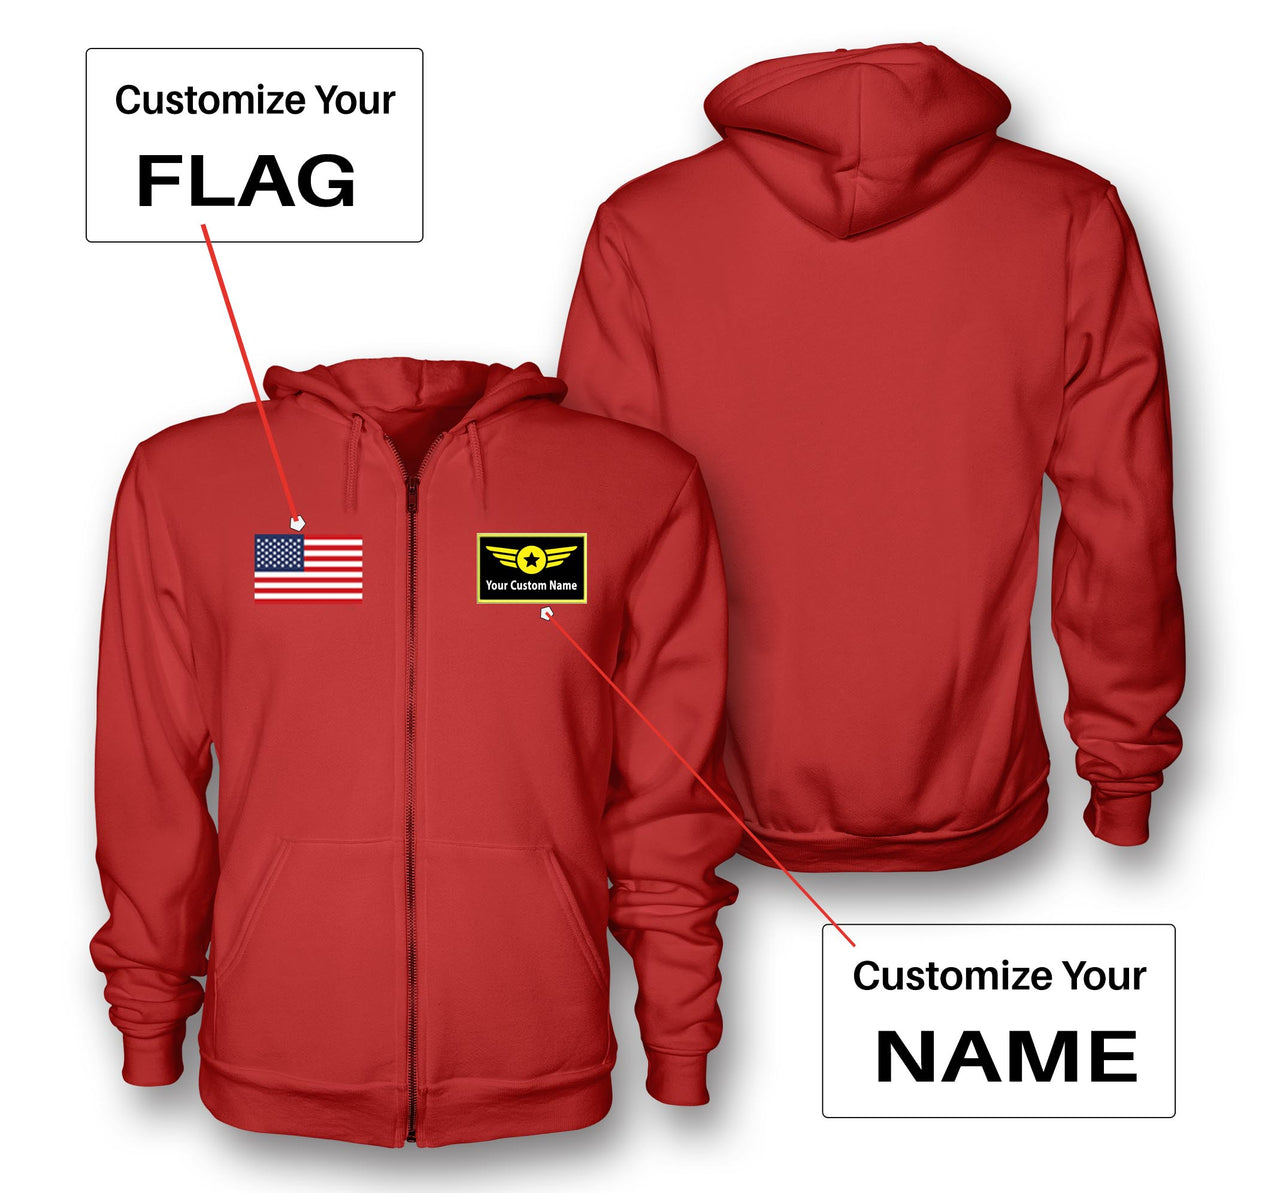 Custom Flag & Name with "Special Badge" Designed Zipped Hoodies